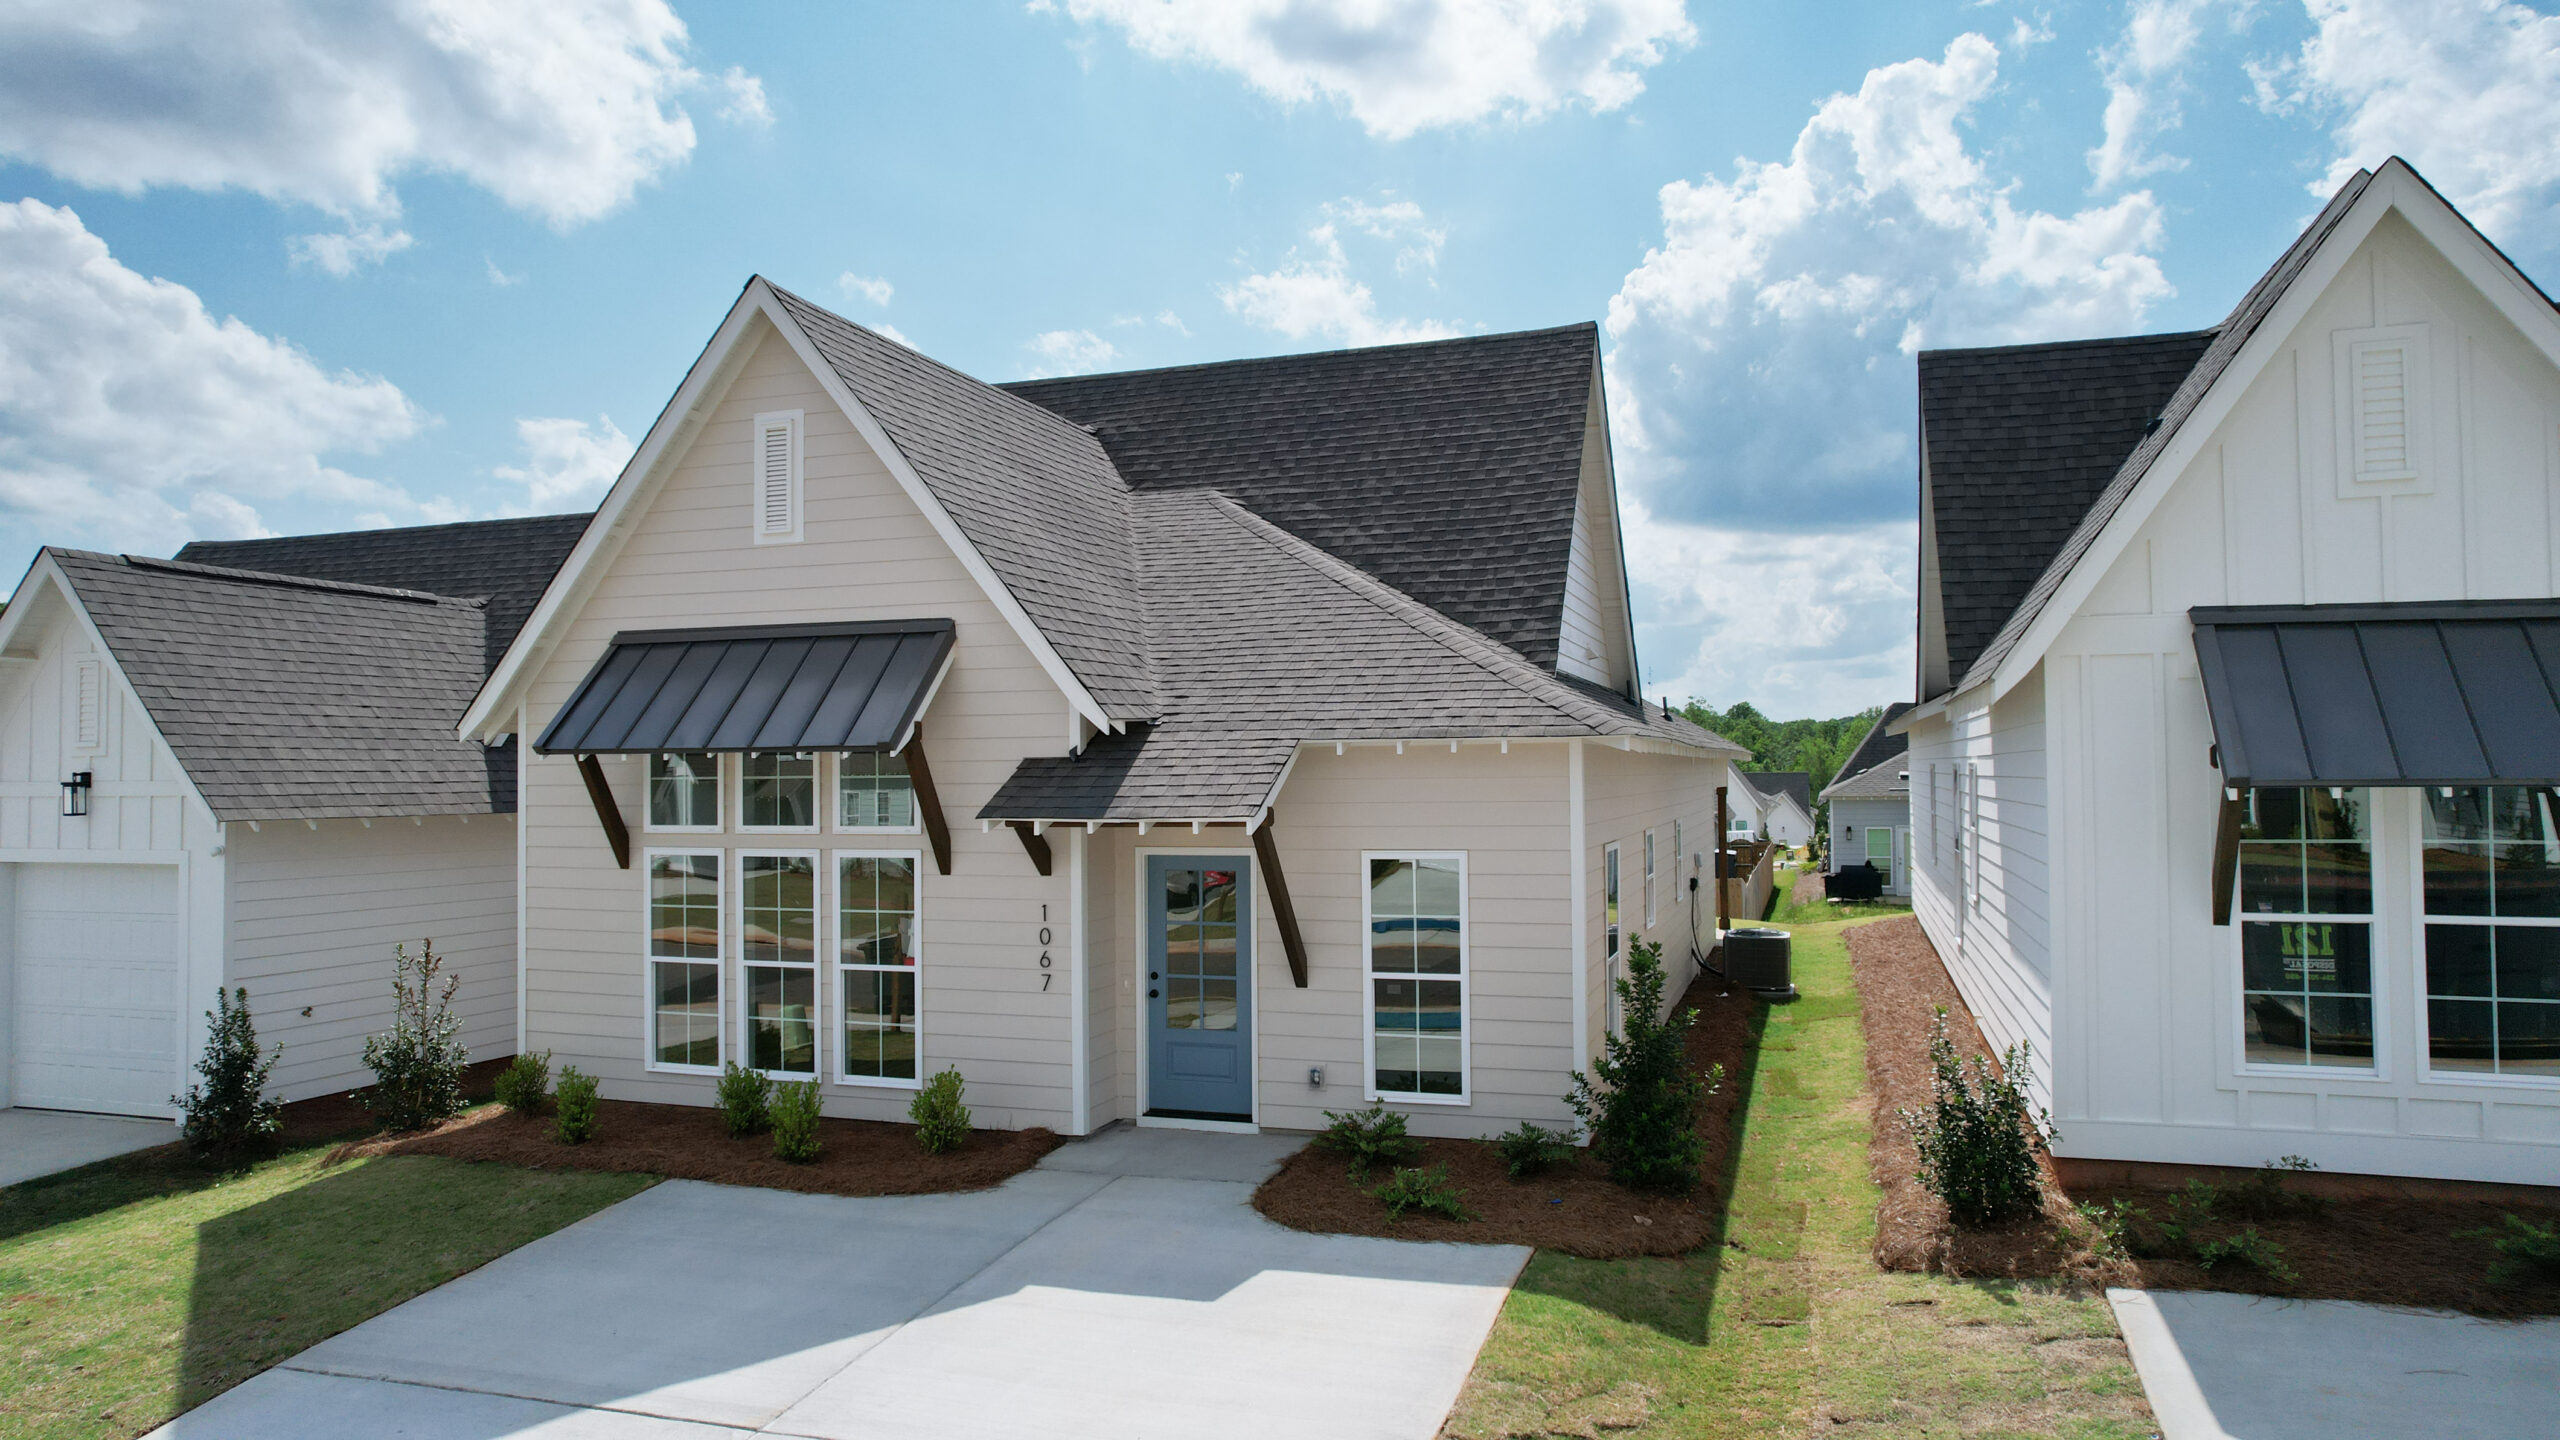 Factors to Consider When Building a New Home in Alabama